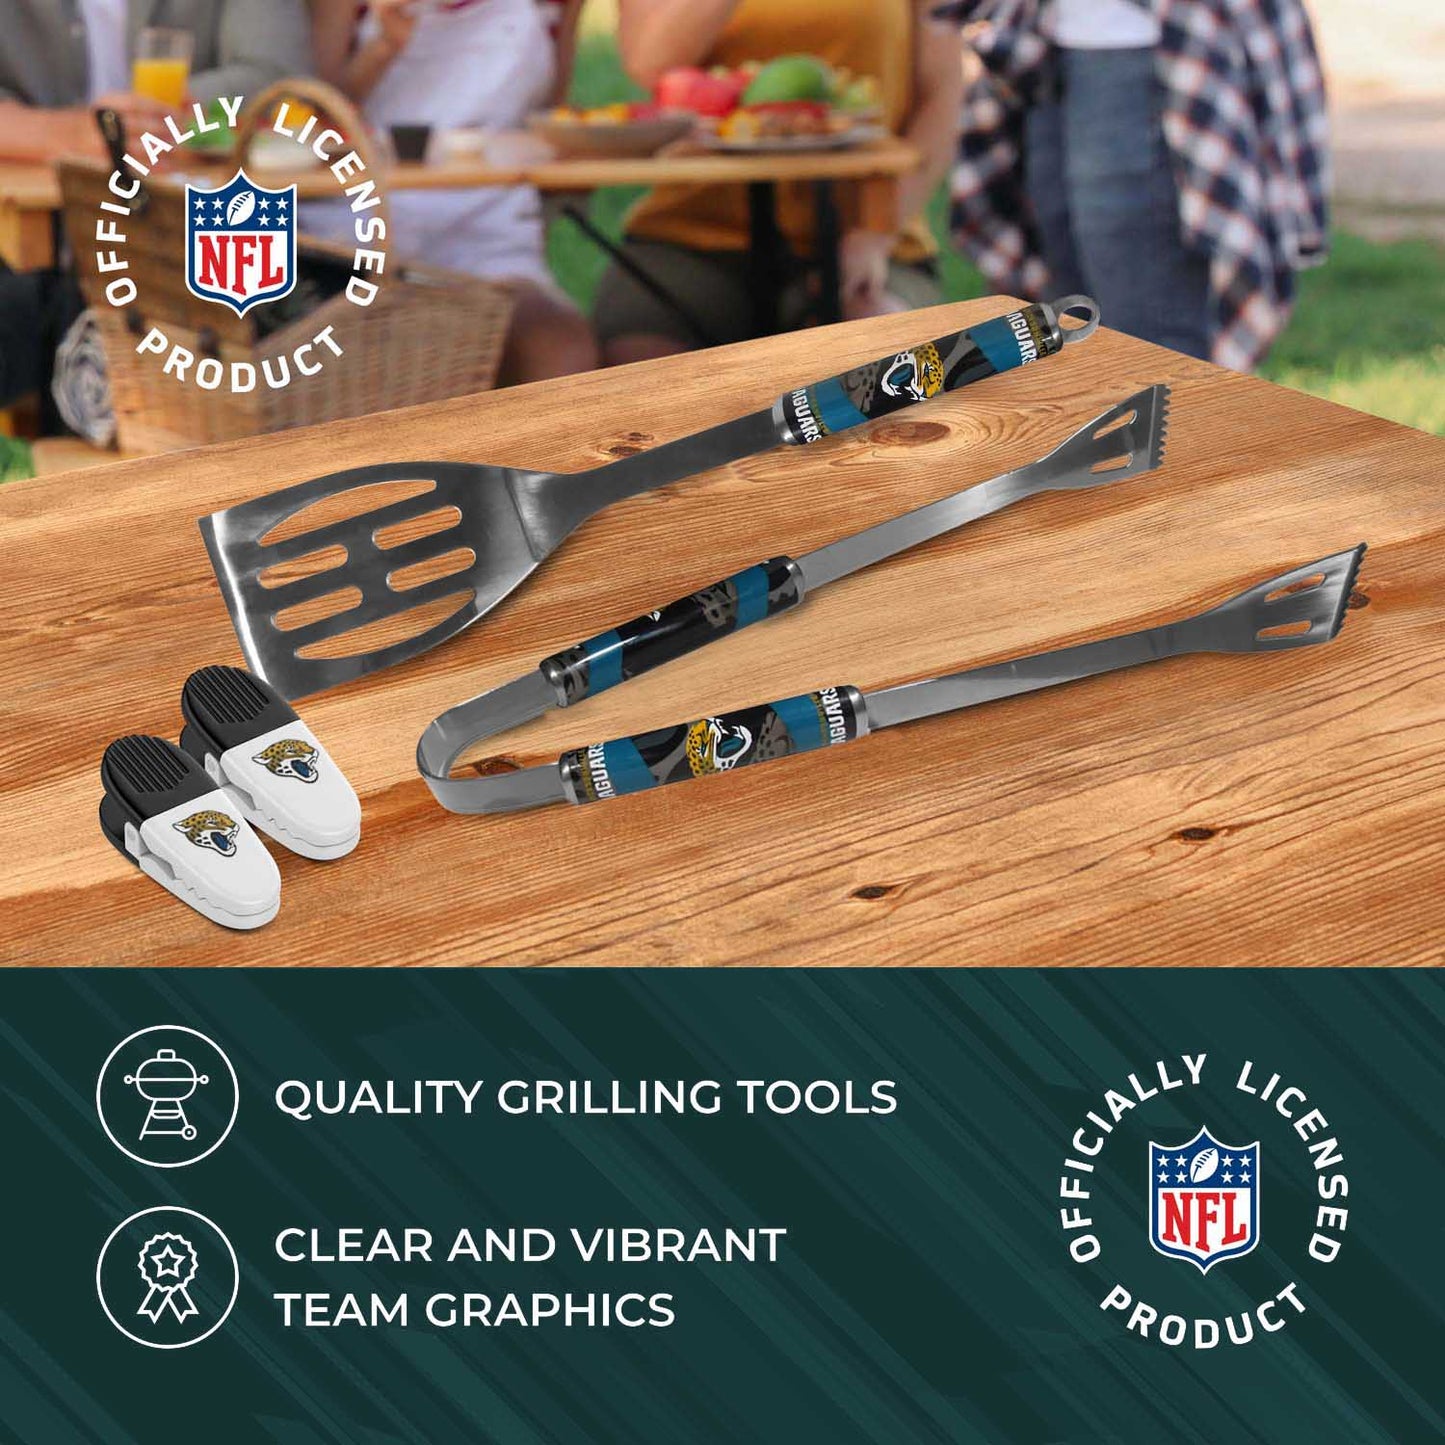 Jacksonville Jaguars NFL Two Piece Grilling Tools Set with 2 Magnet Chip Clips - Chrome